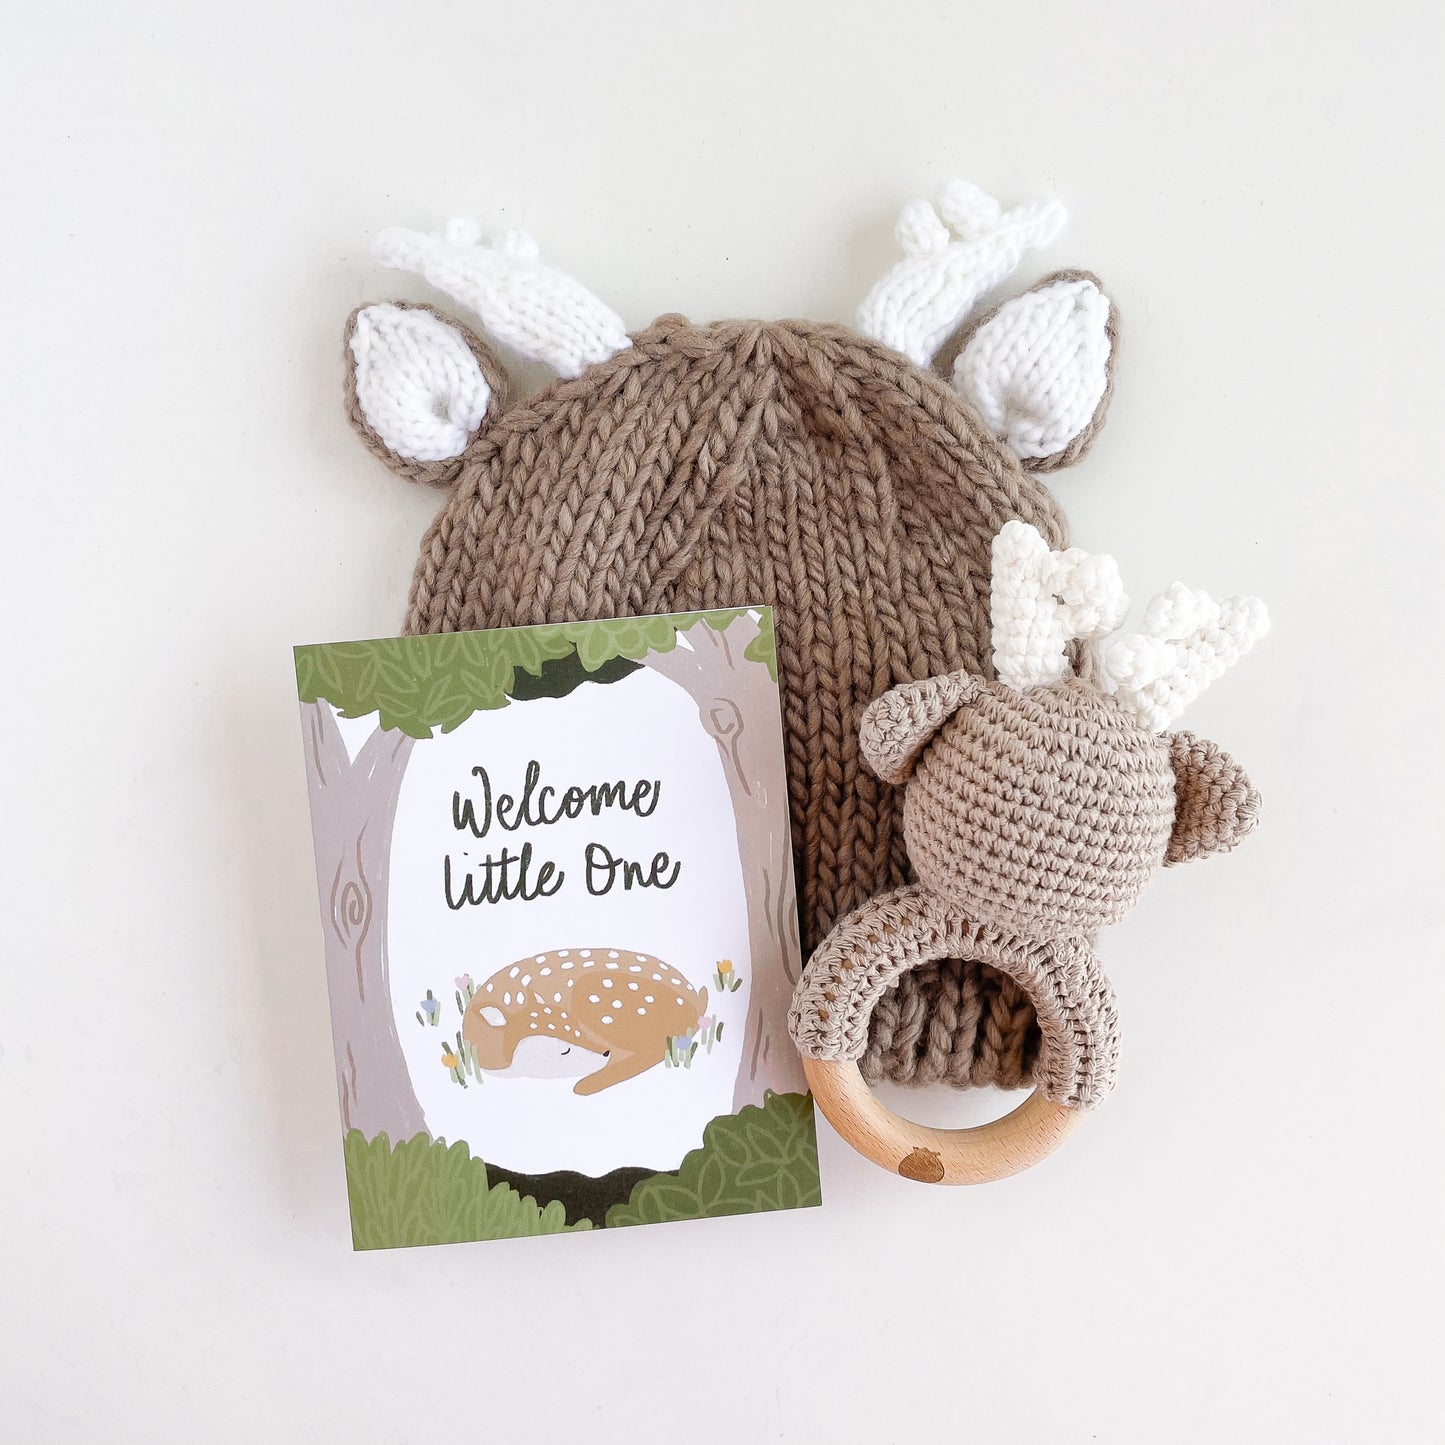 Welcome Little One Deer Baby Card